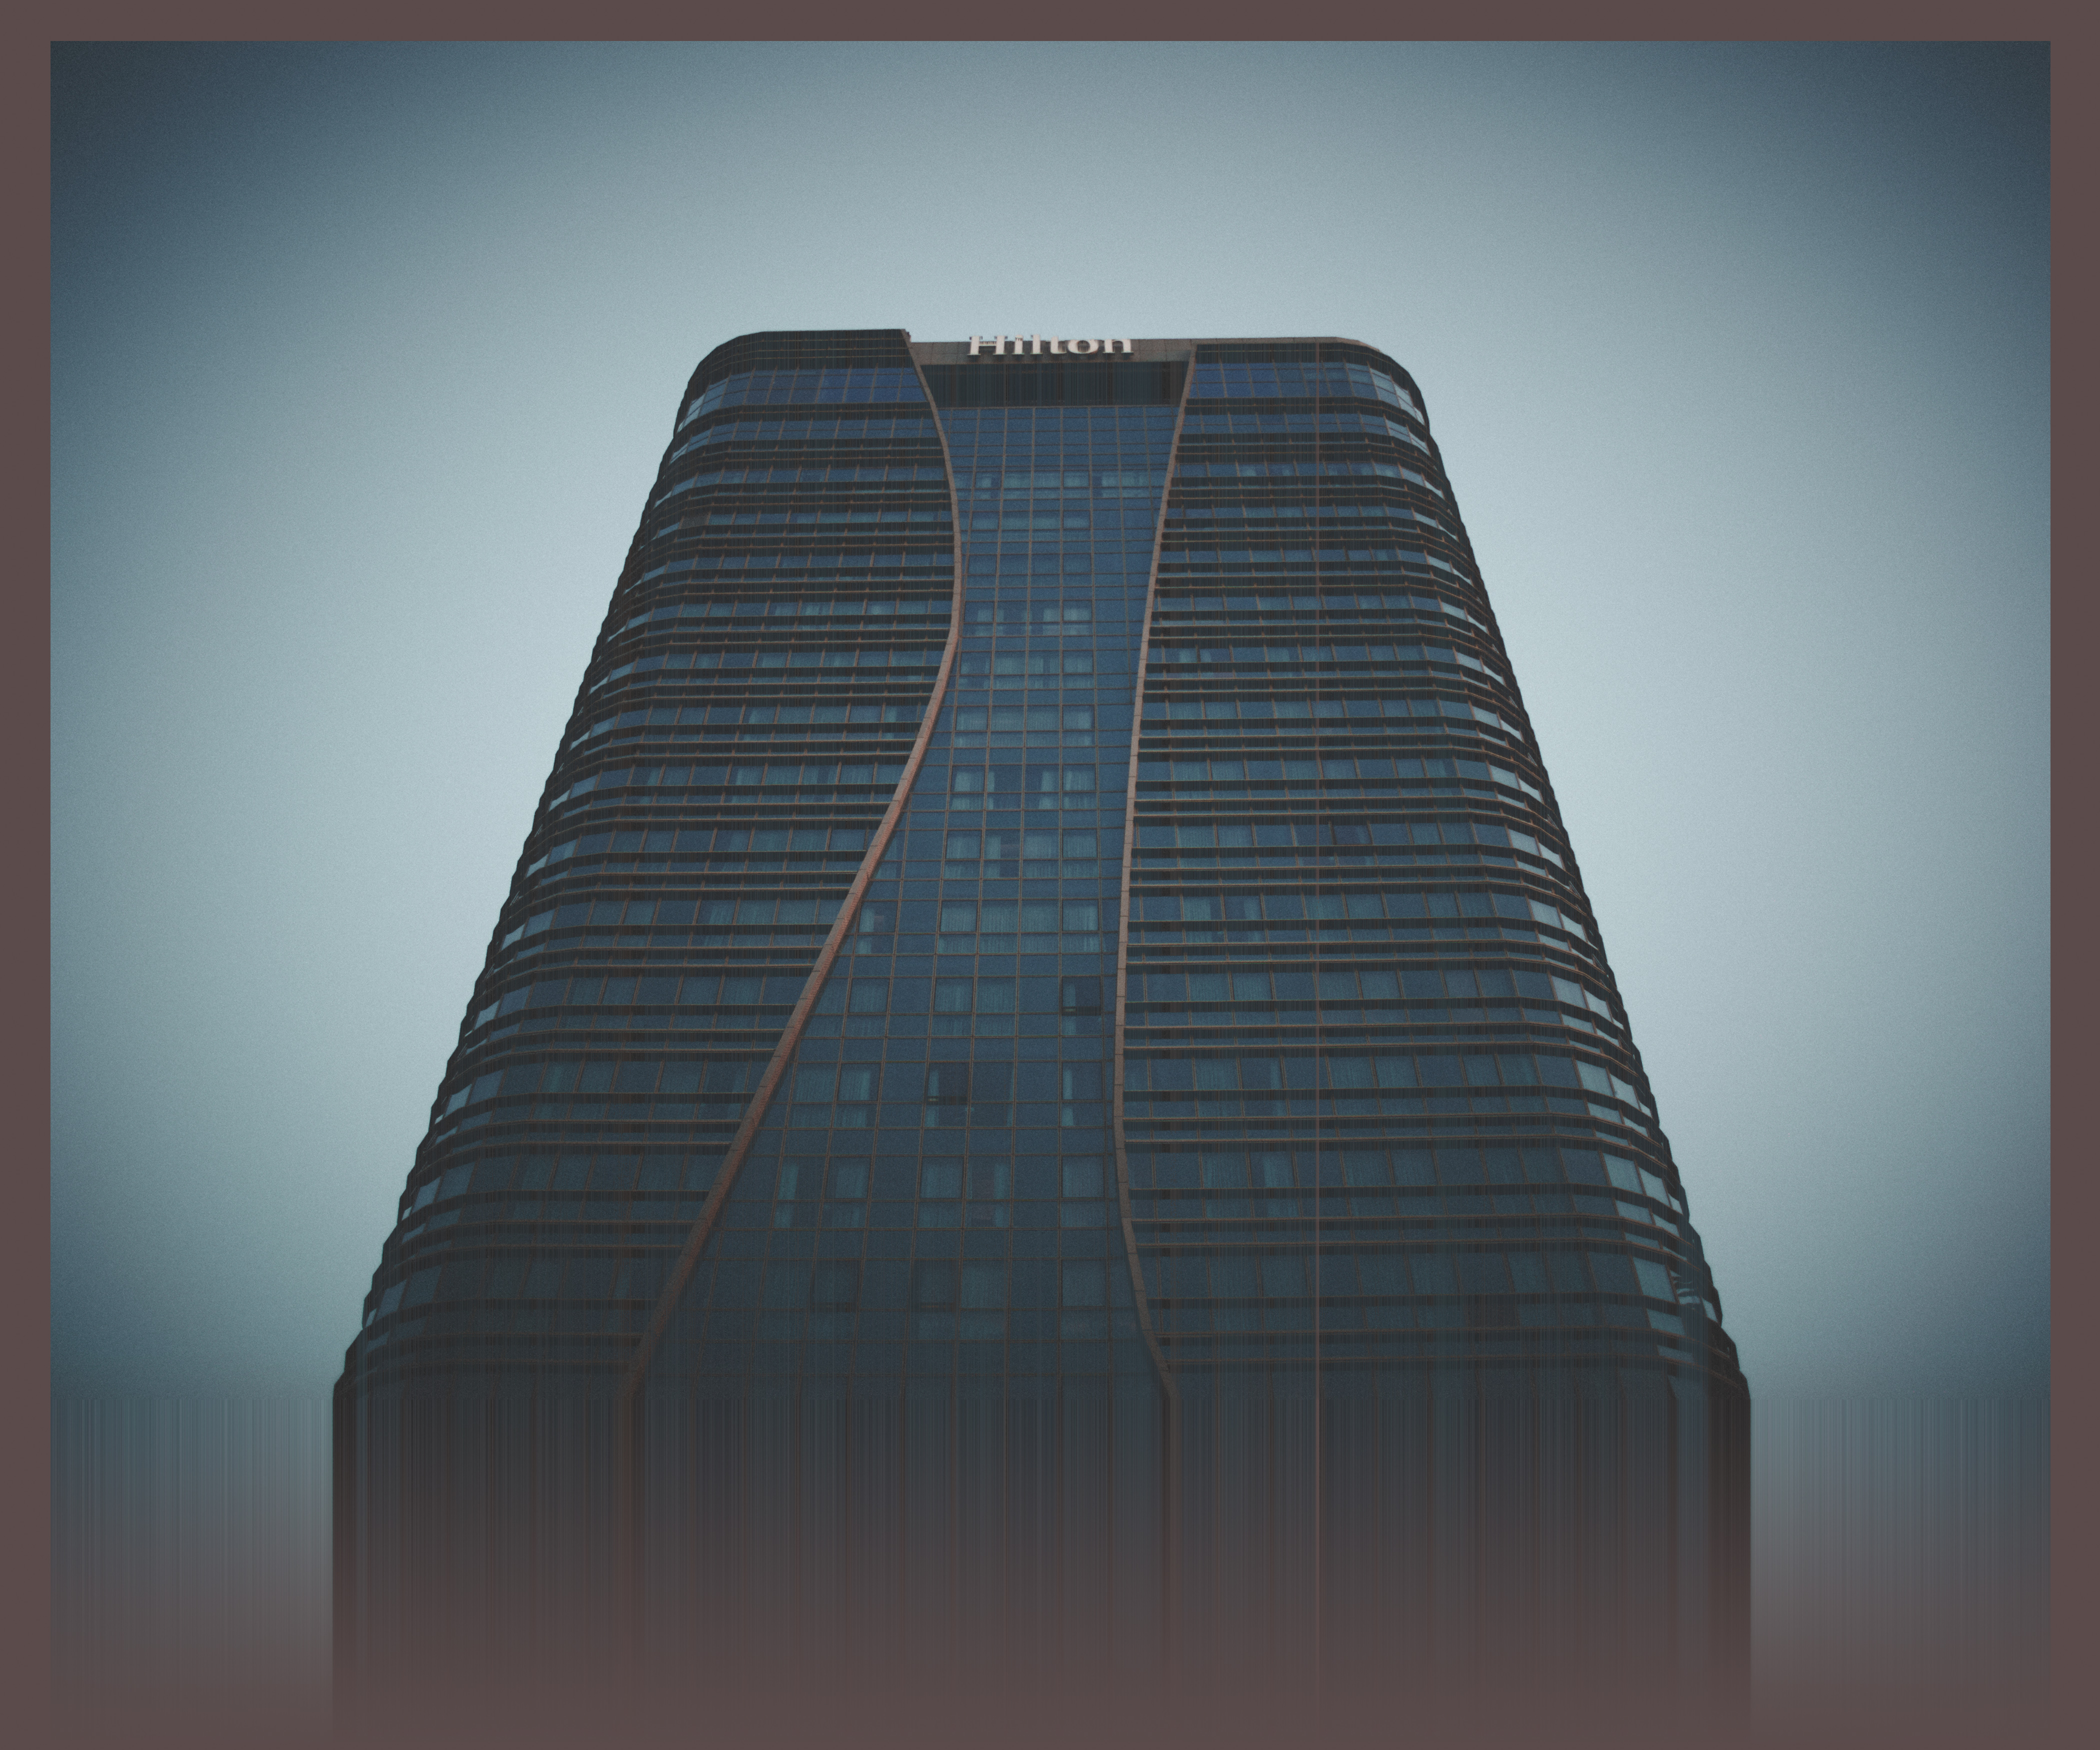 General 4200x3500 hotel building skyscraper teal glitch art photoshopped photography noise